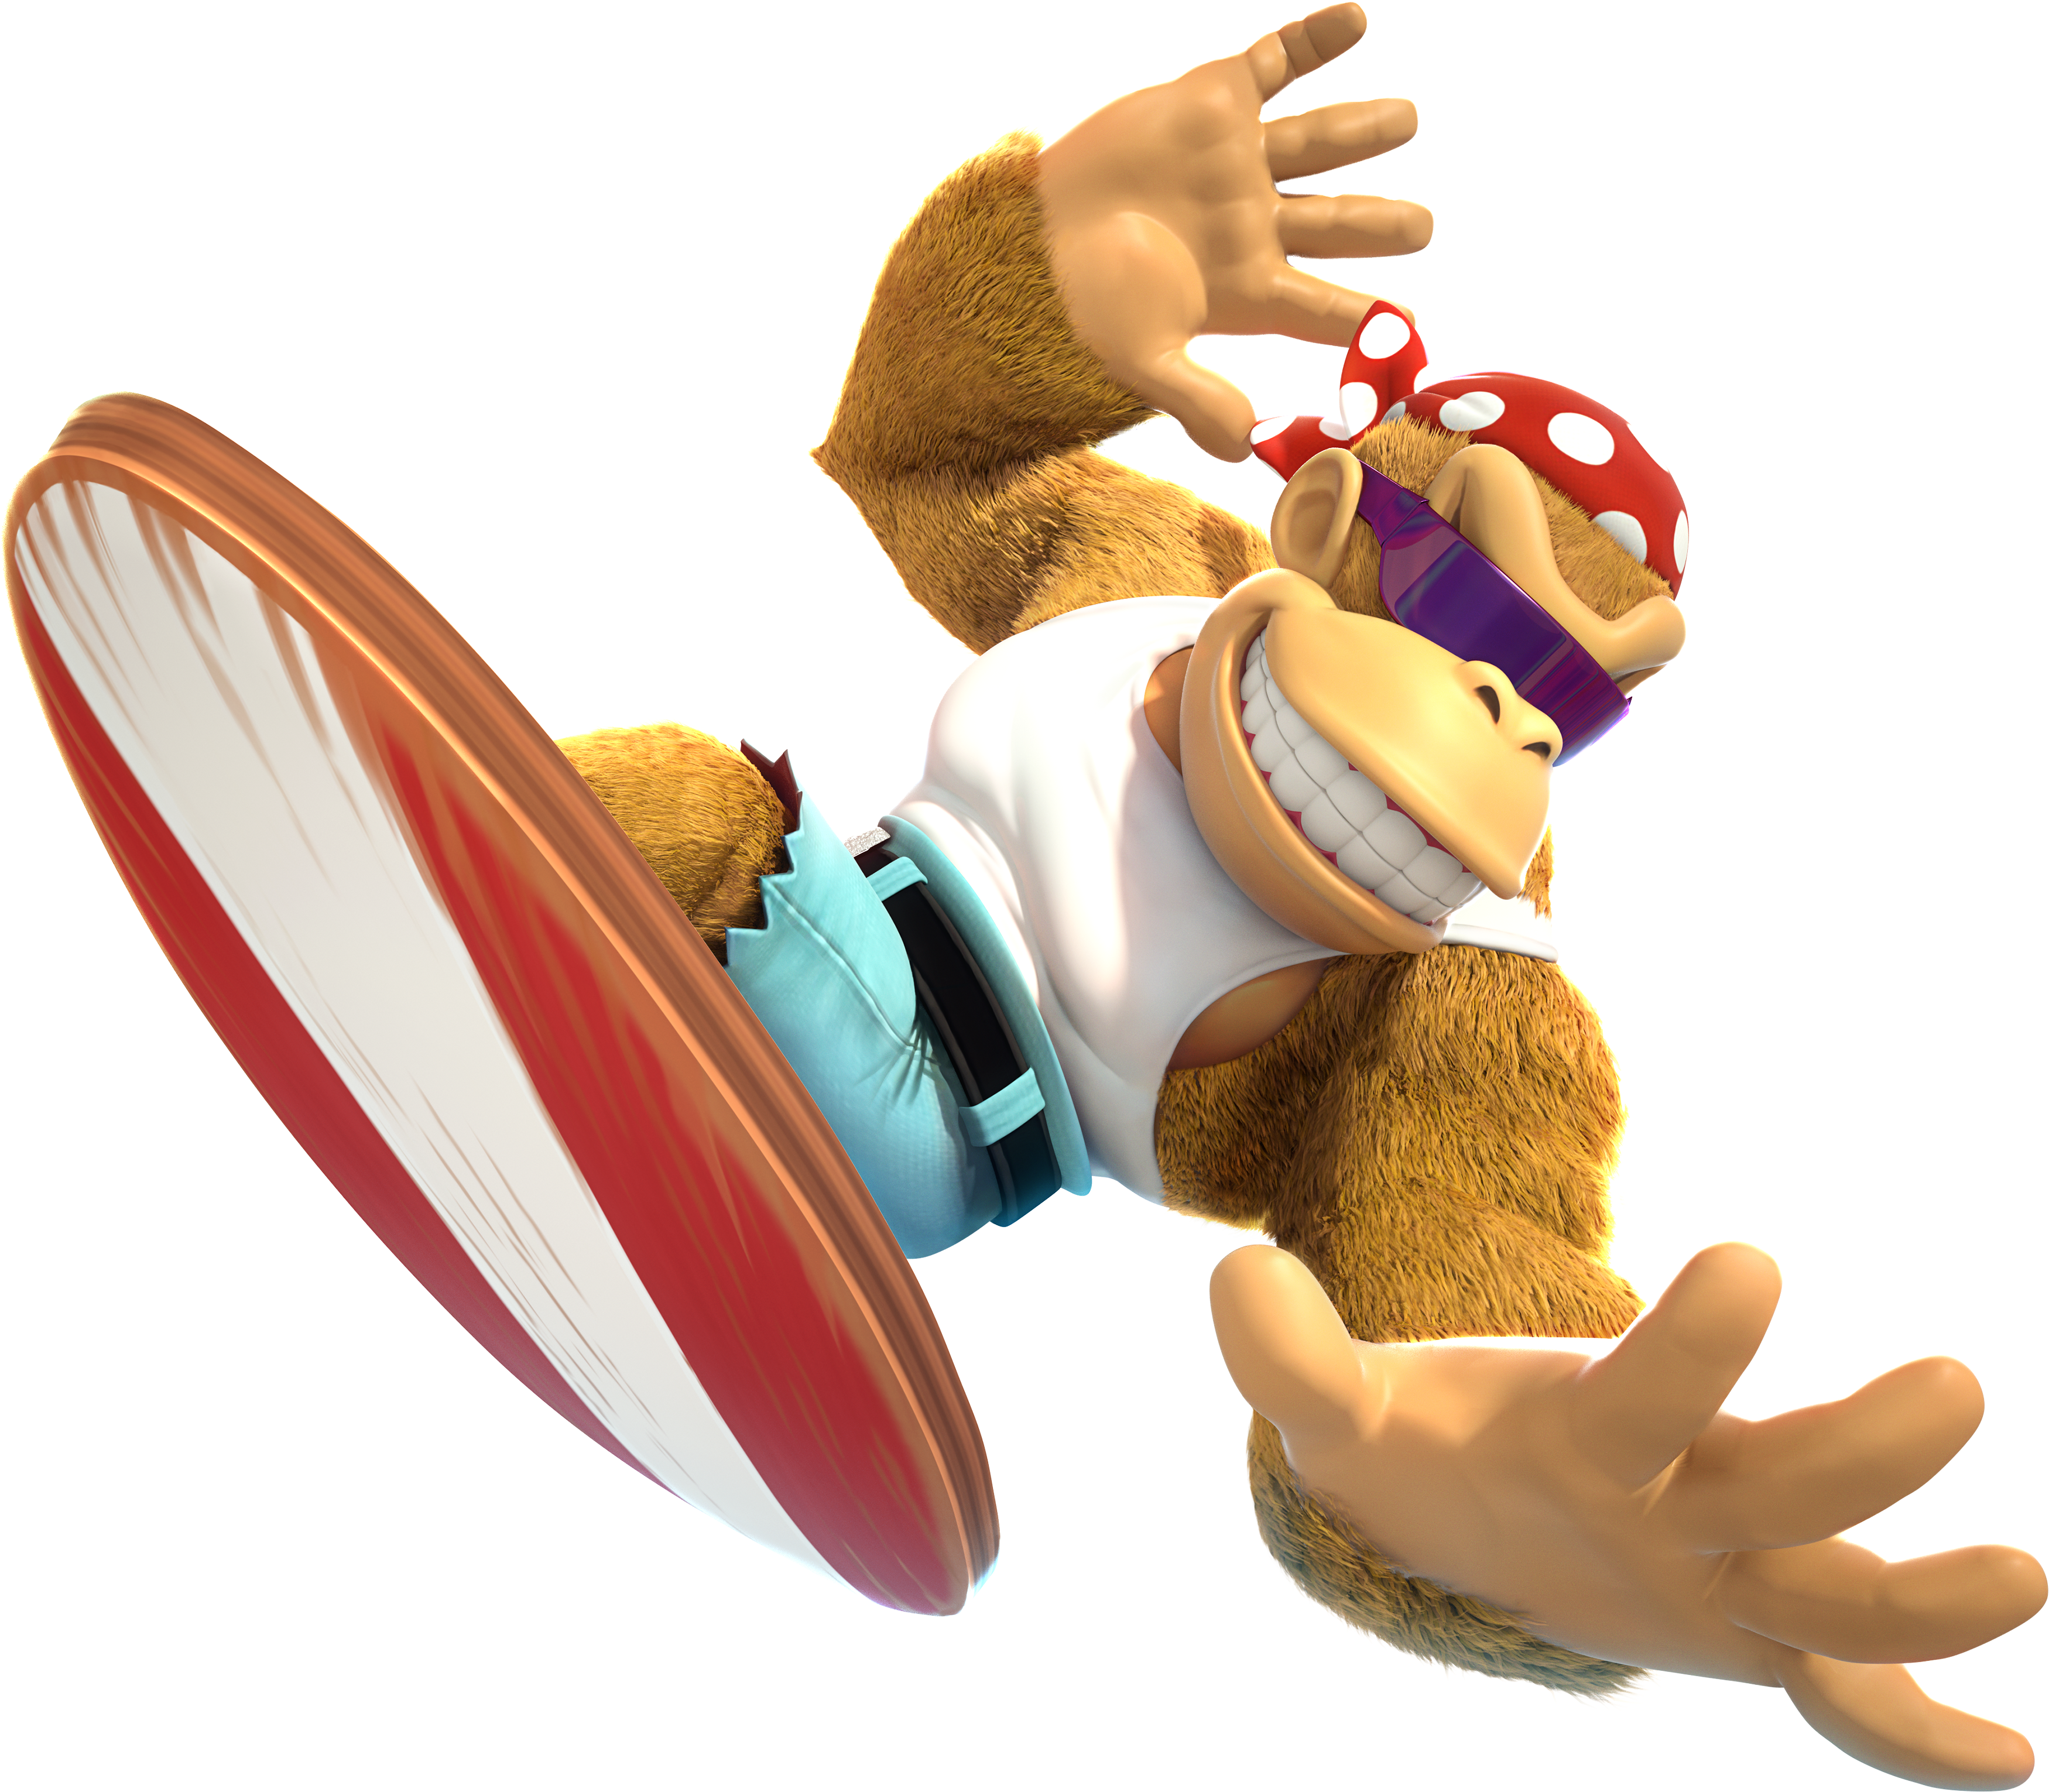 is Funky Kong worth it? (besides being cool of course) : r/MarioKartTour